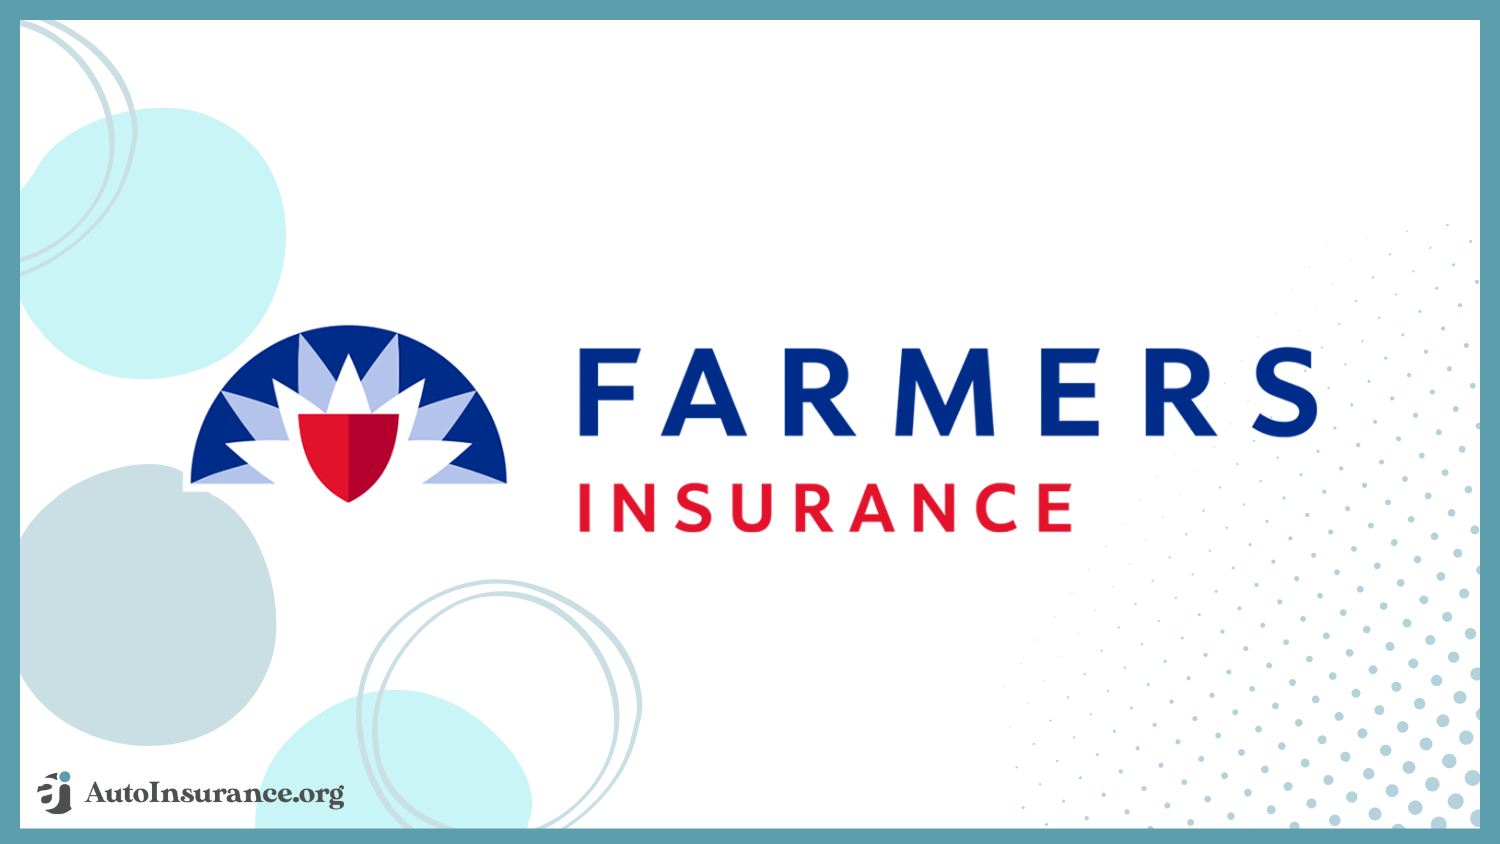 Farmers: Best Auto Insurance for Luxury Cars